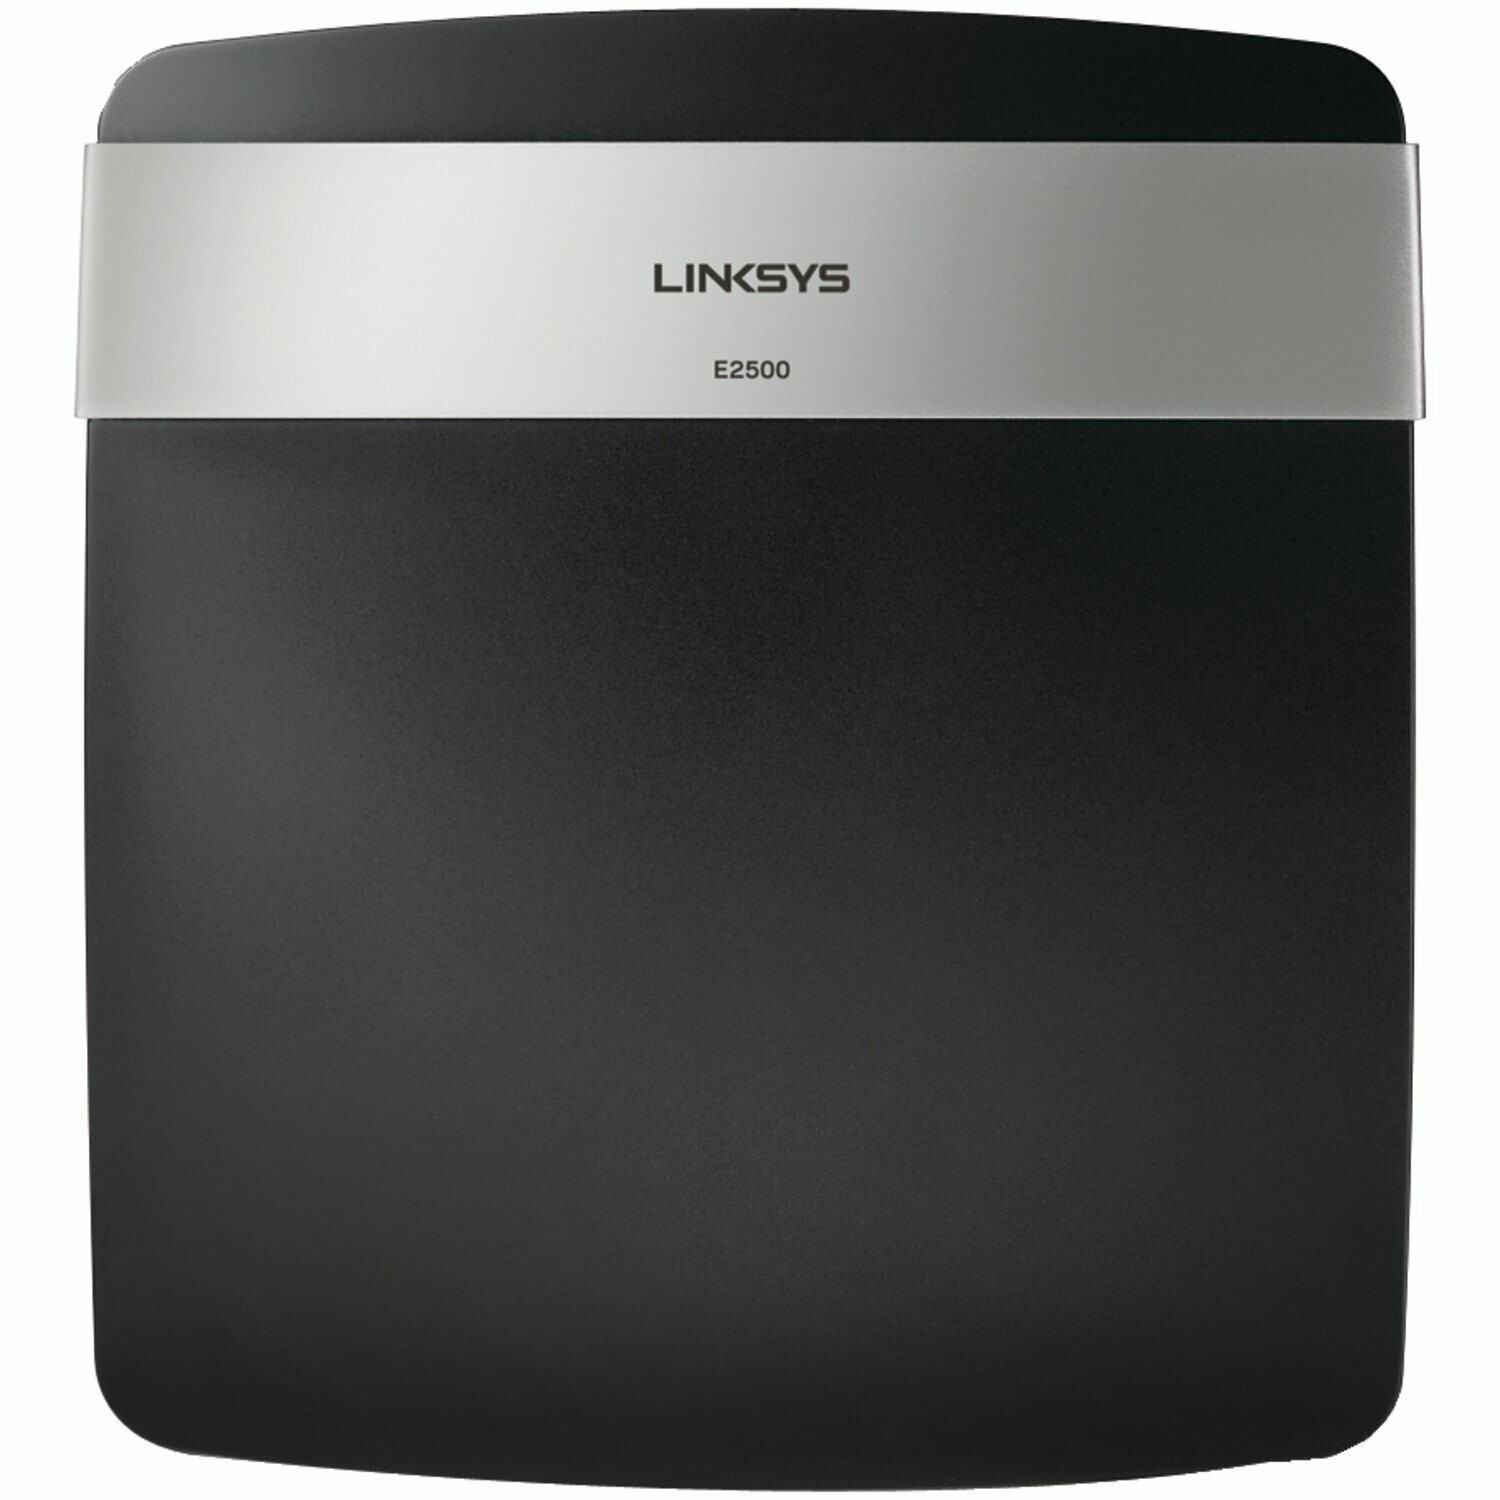 Linksys E2500 (N600) Dual-Band Wi-Fi Router